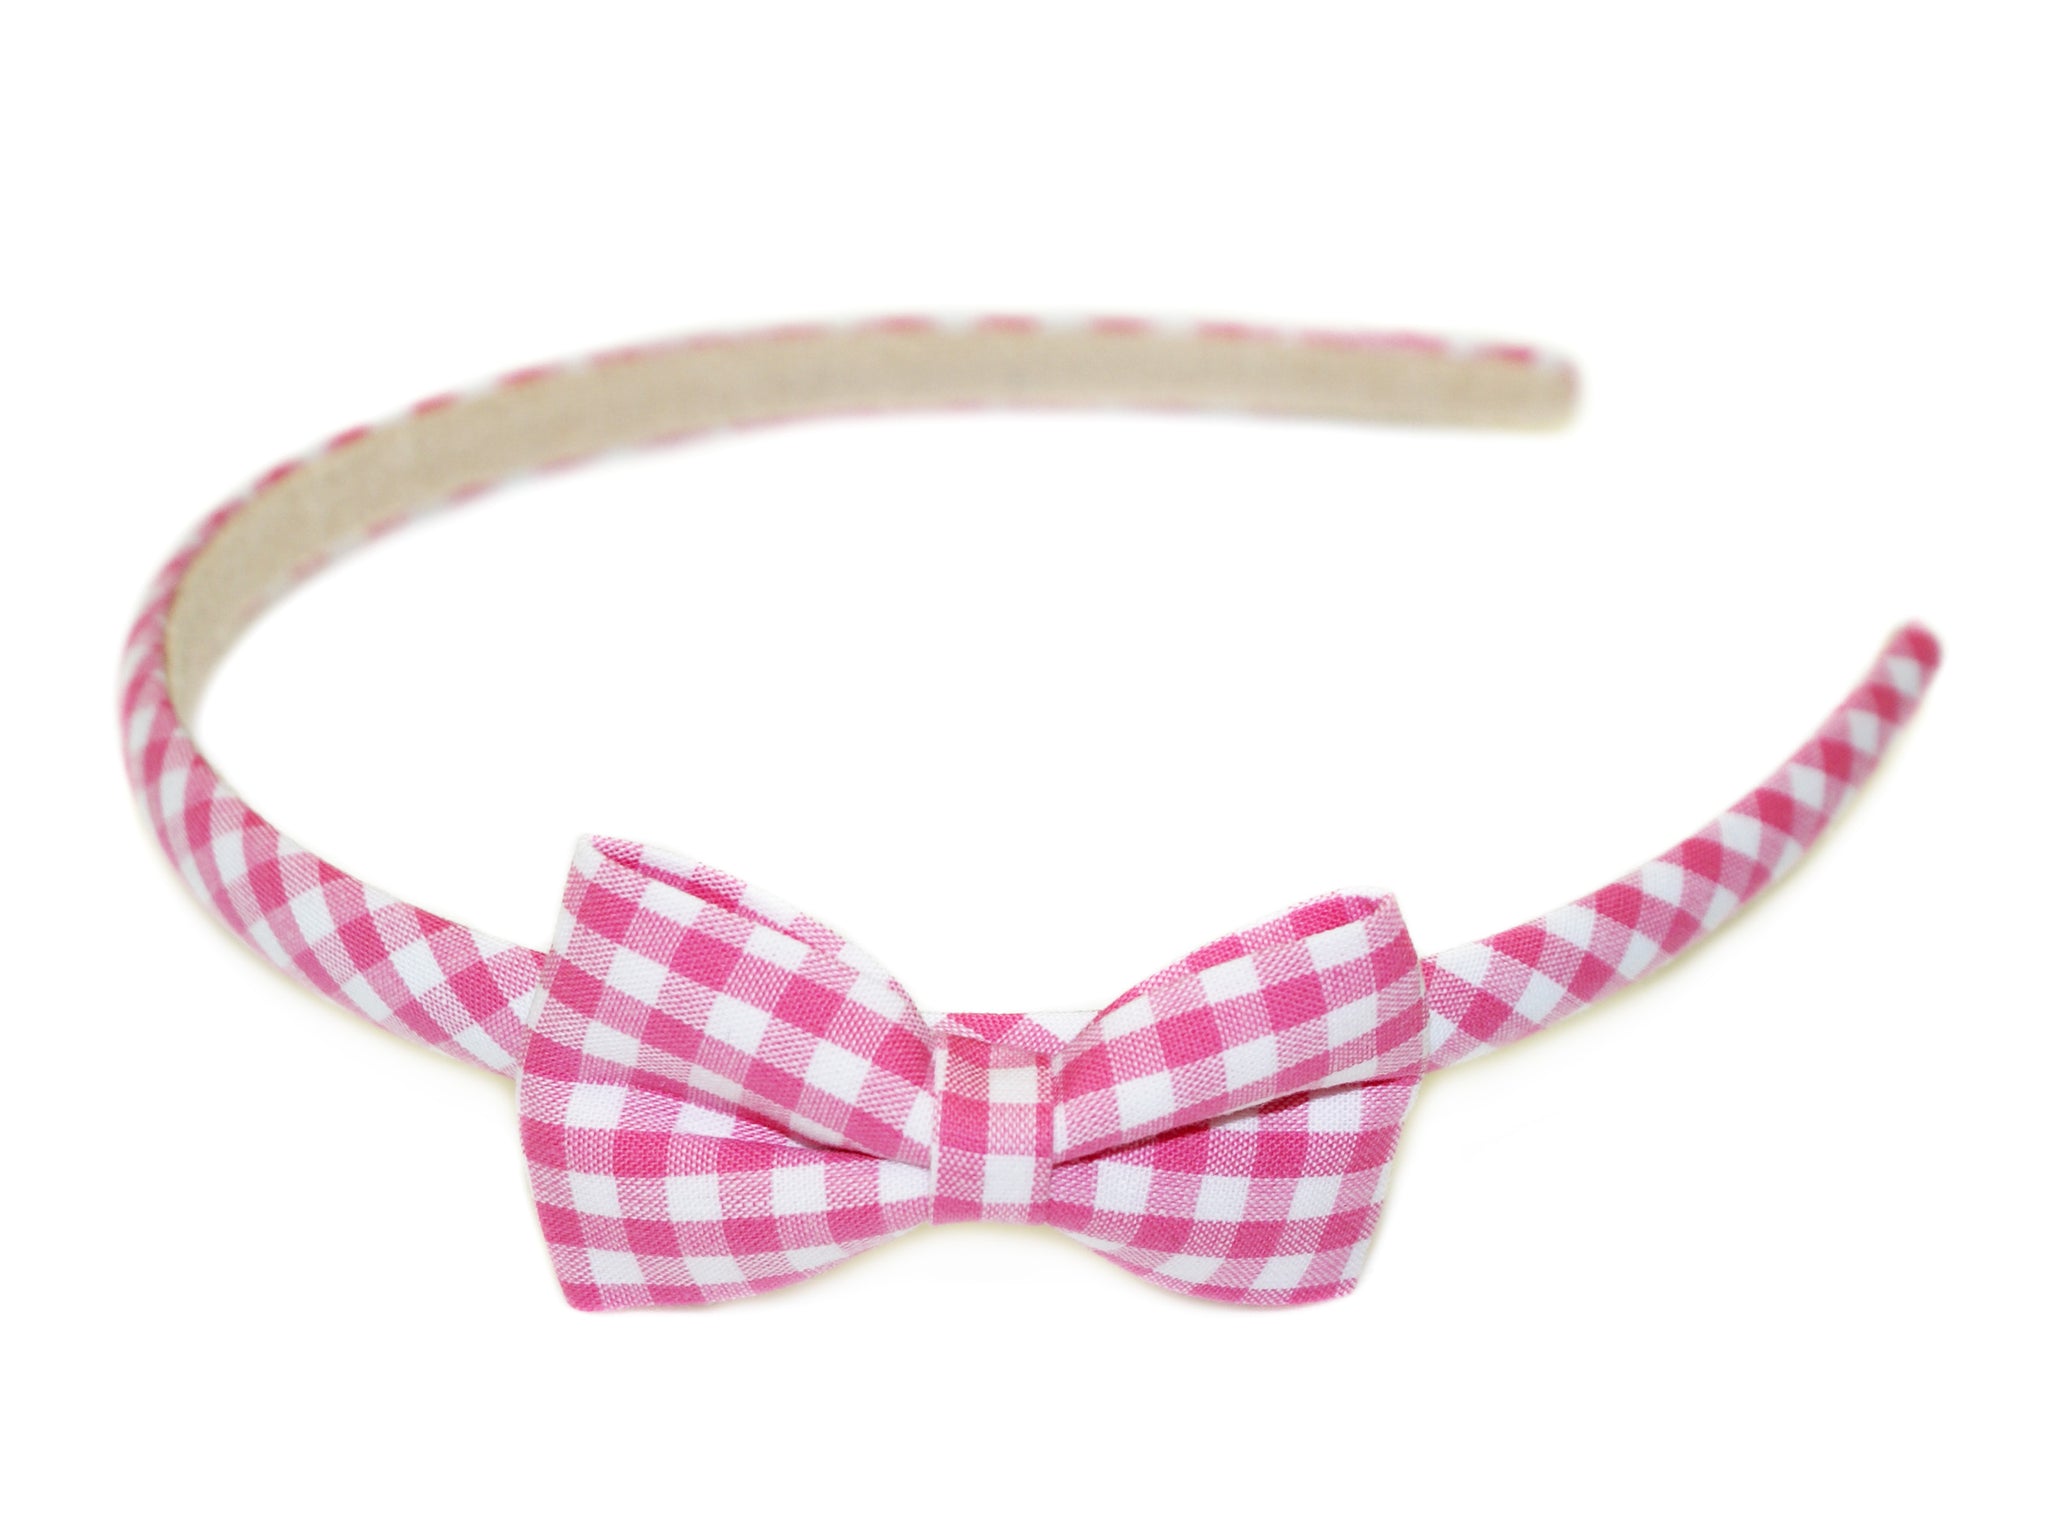 Gingham Bow Alice Band - Dark Pink